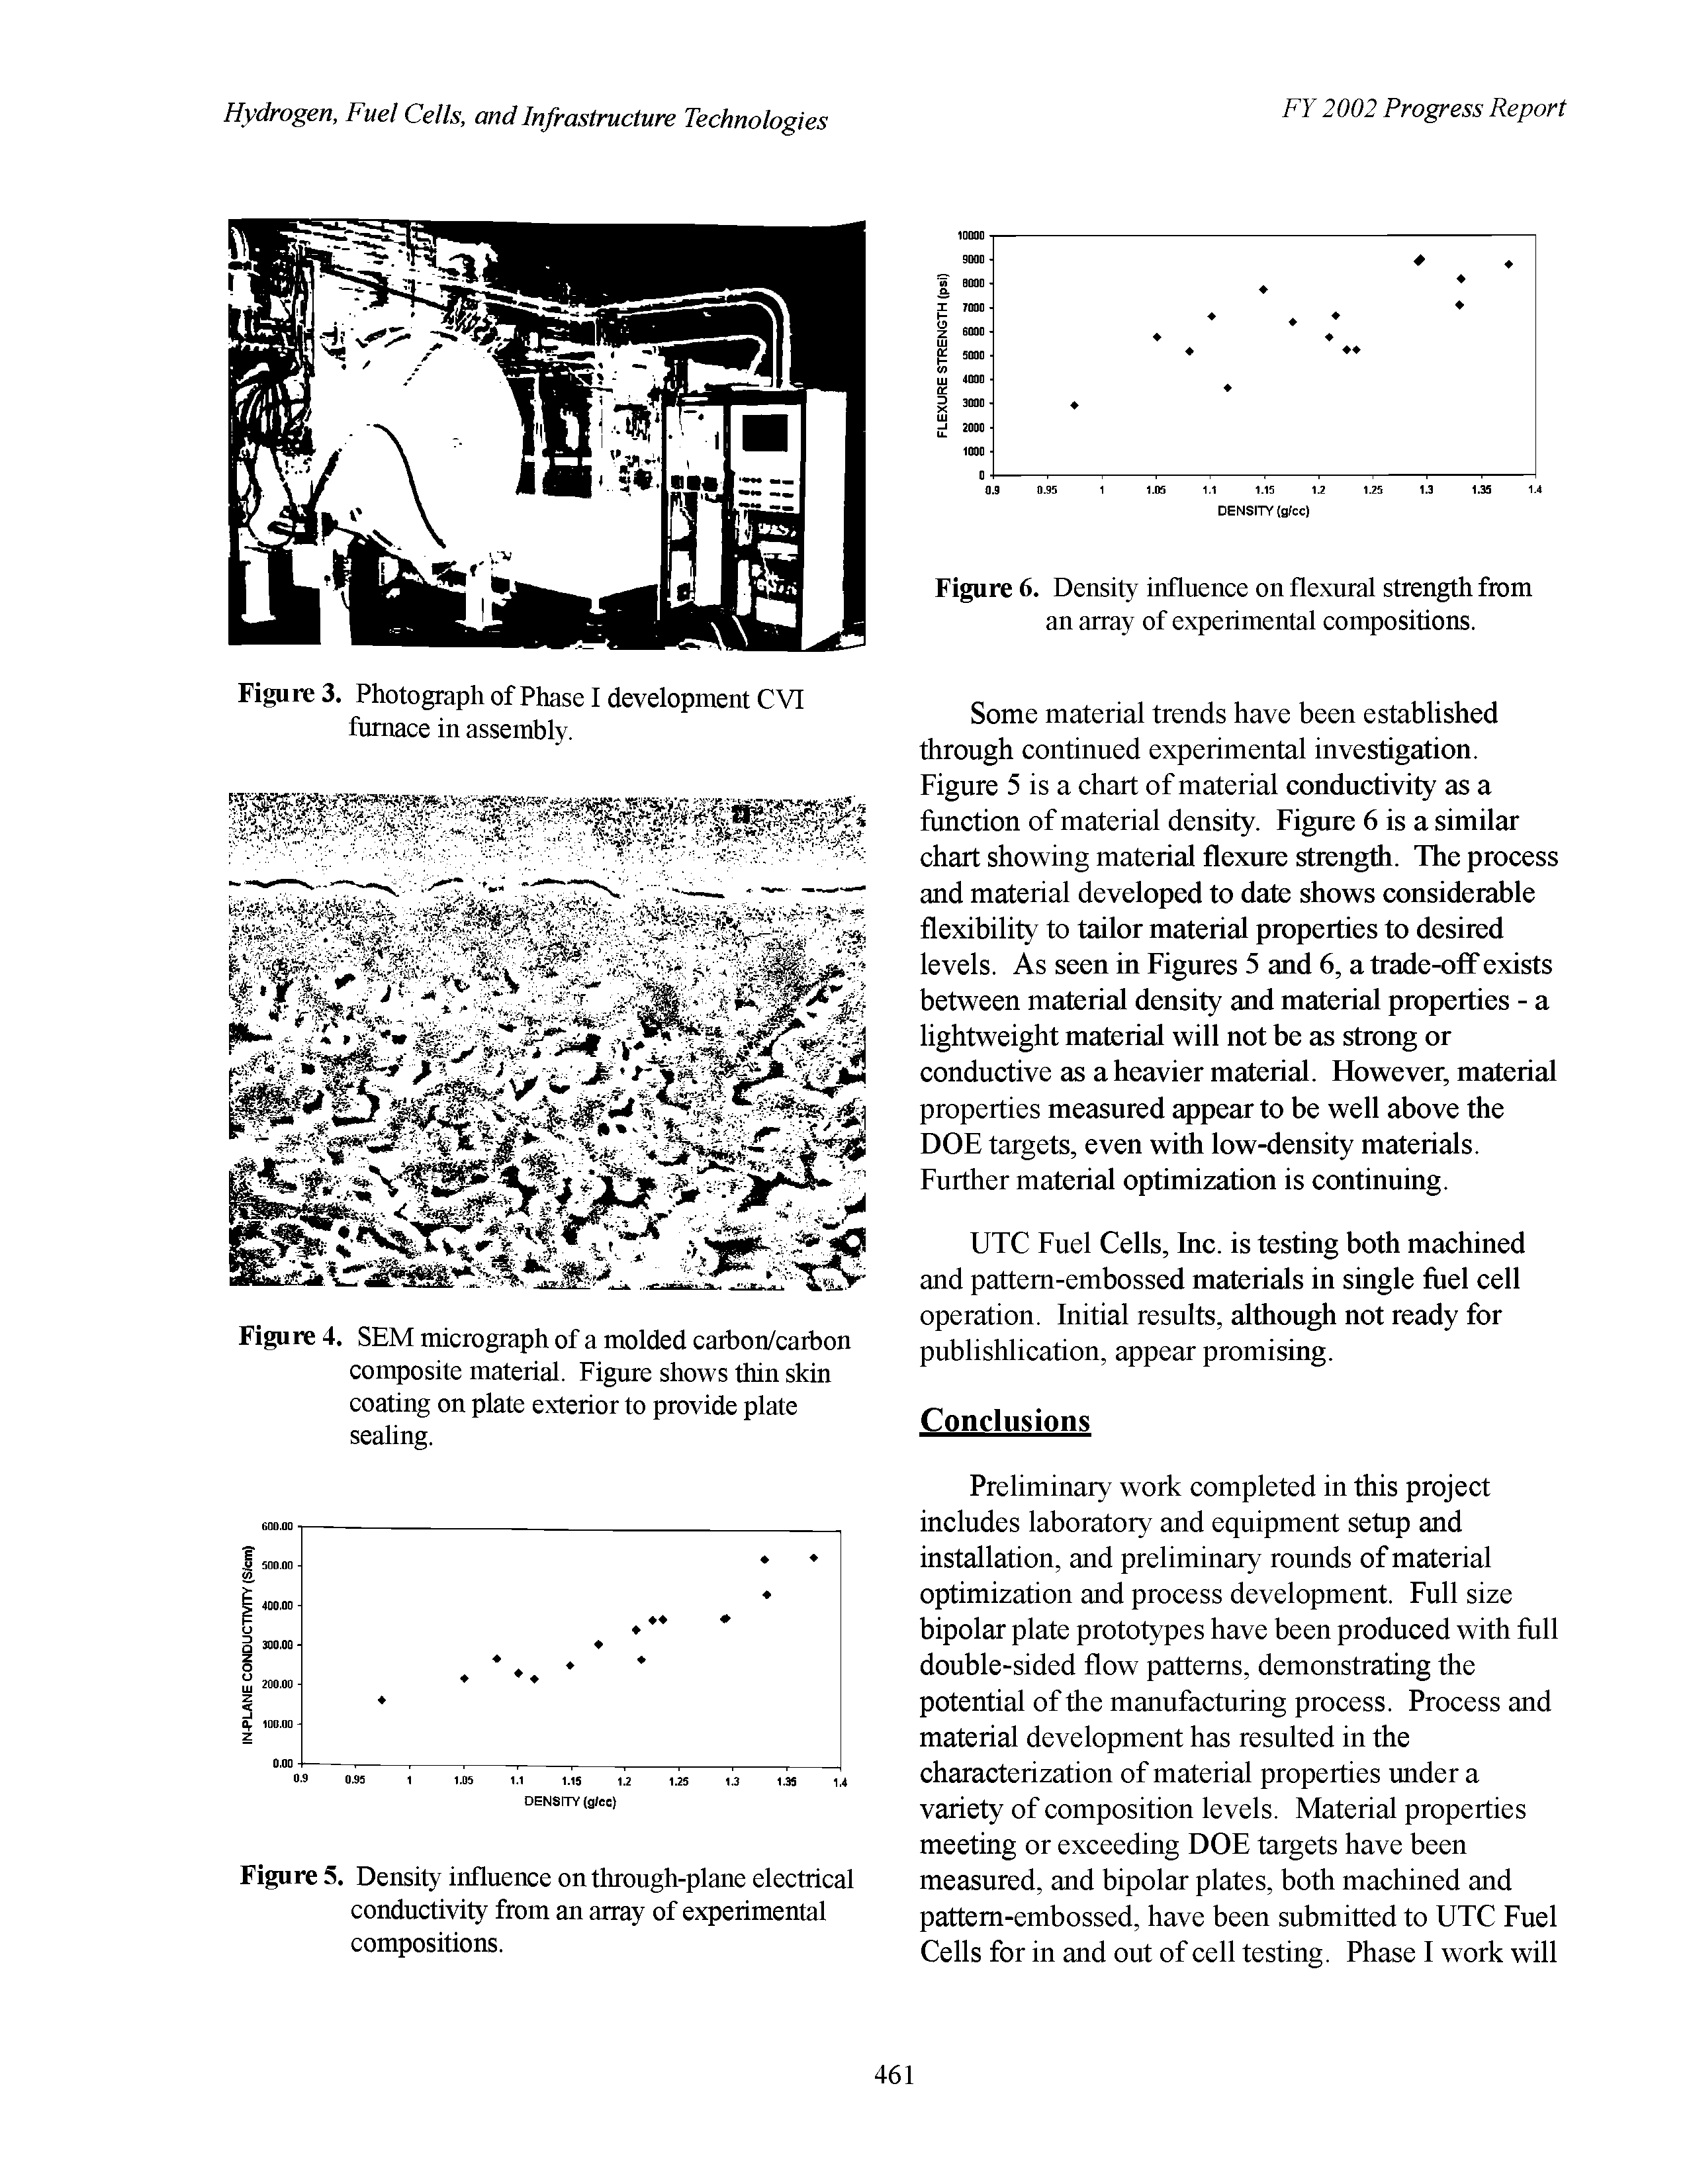 Figure 5. Density influence on through-plane electrical conductivity from an array of experimental compositions.